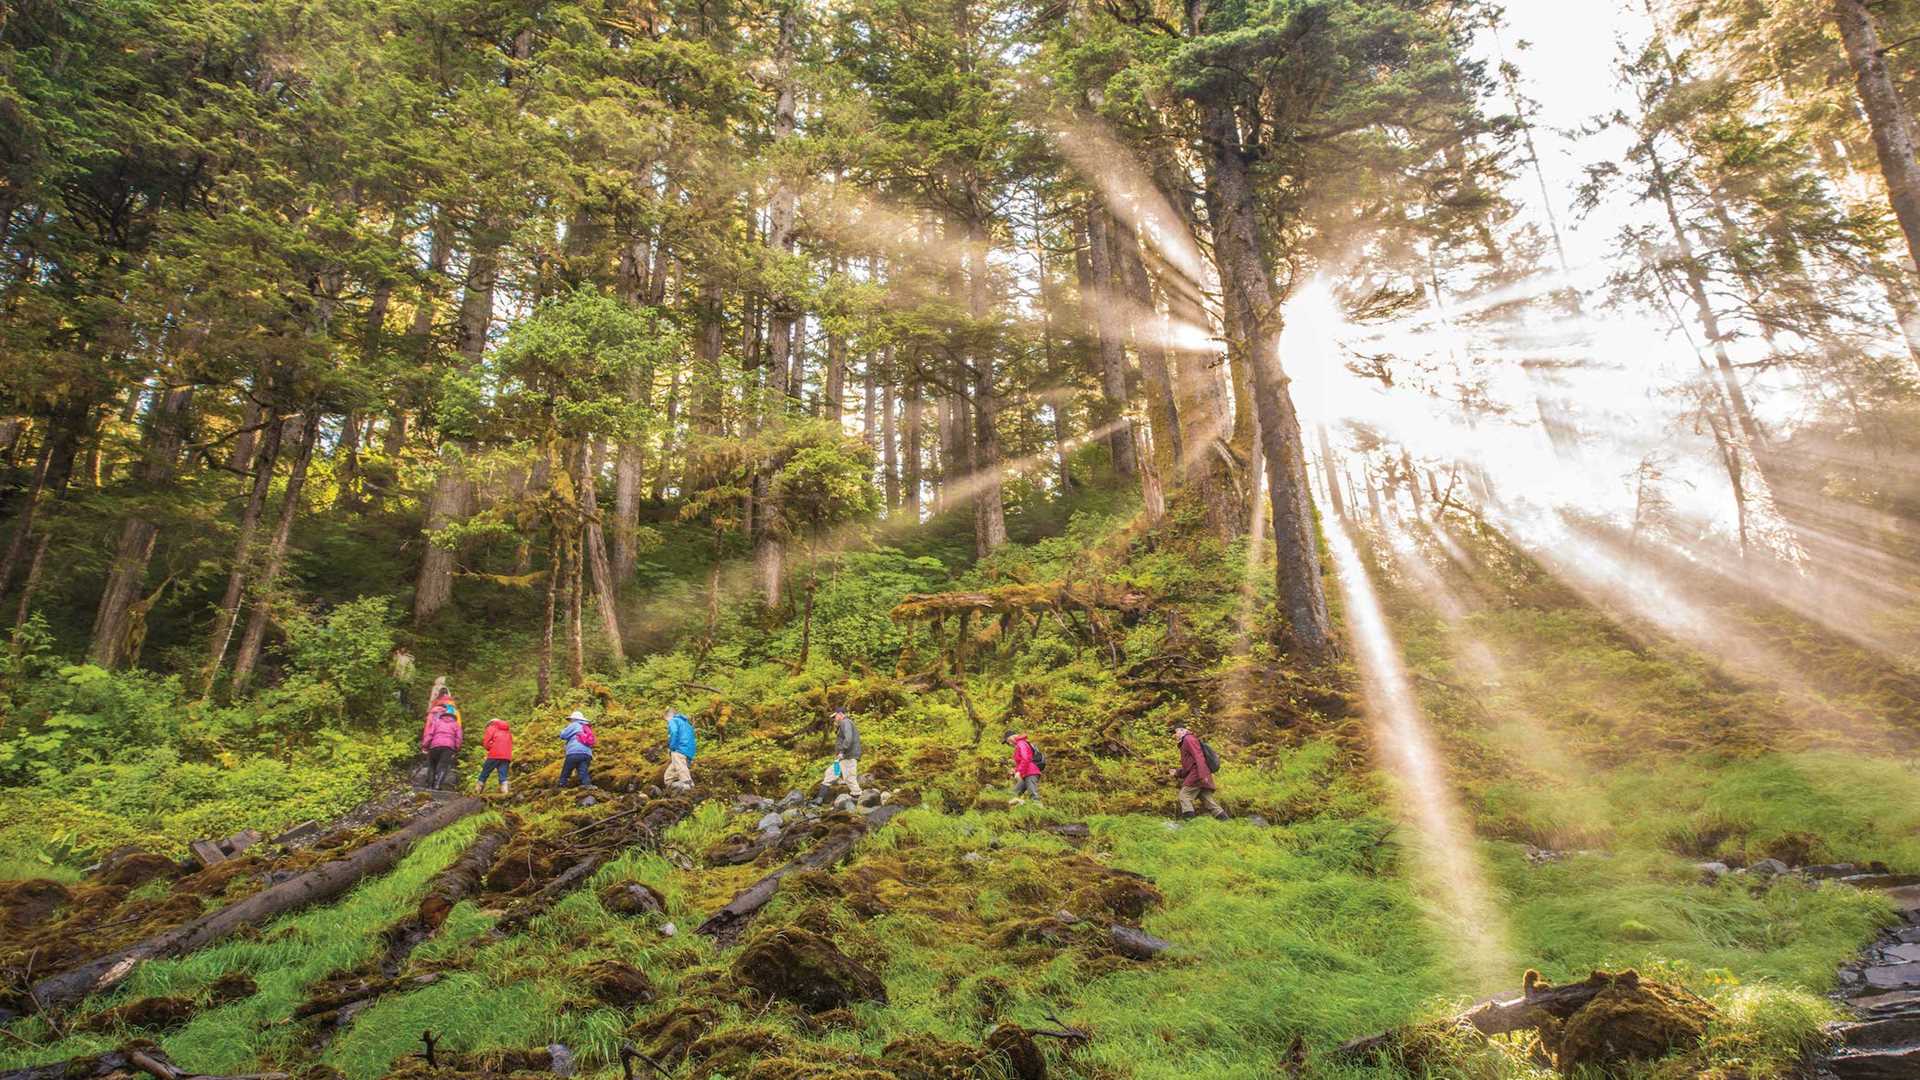 Guests hike through a lush forest in Alaska